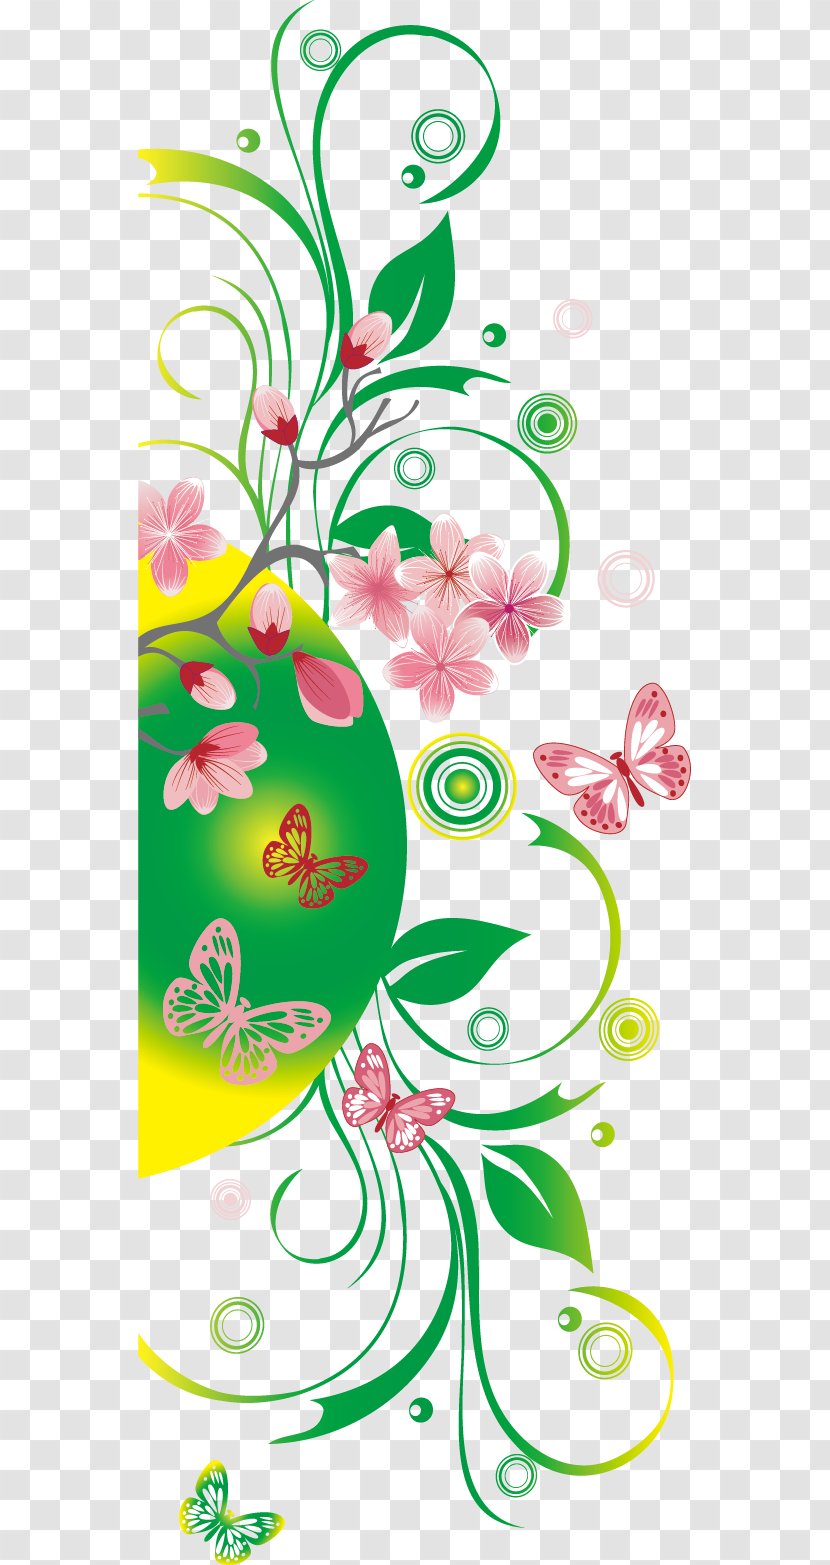 Drawing Cartoon - Floral Design - Cherry Blossom Pattern Transparent PNG